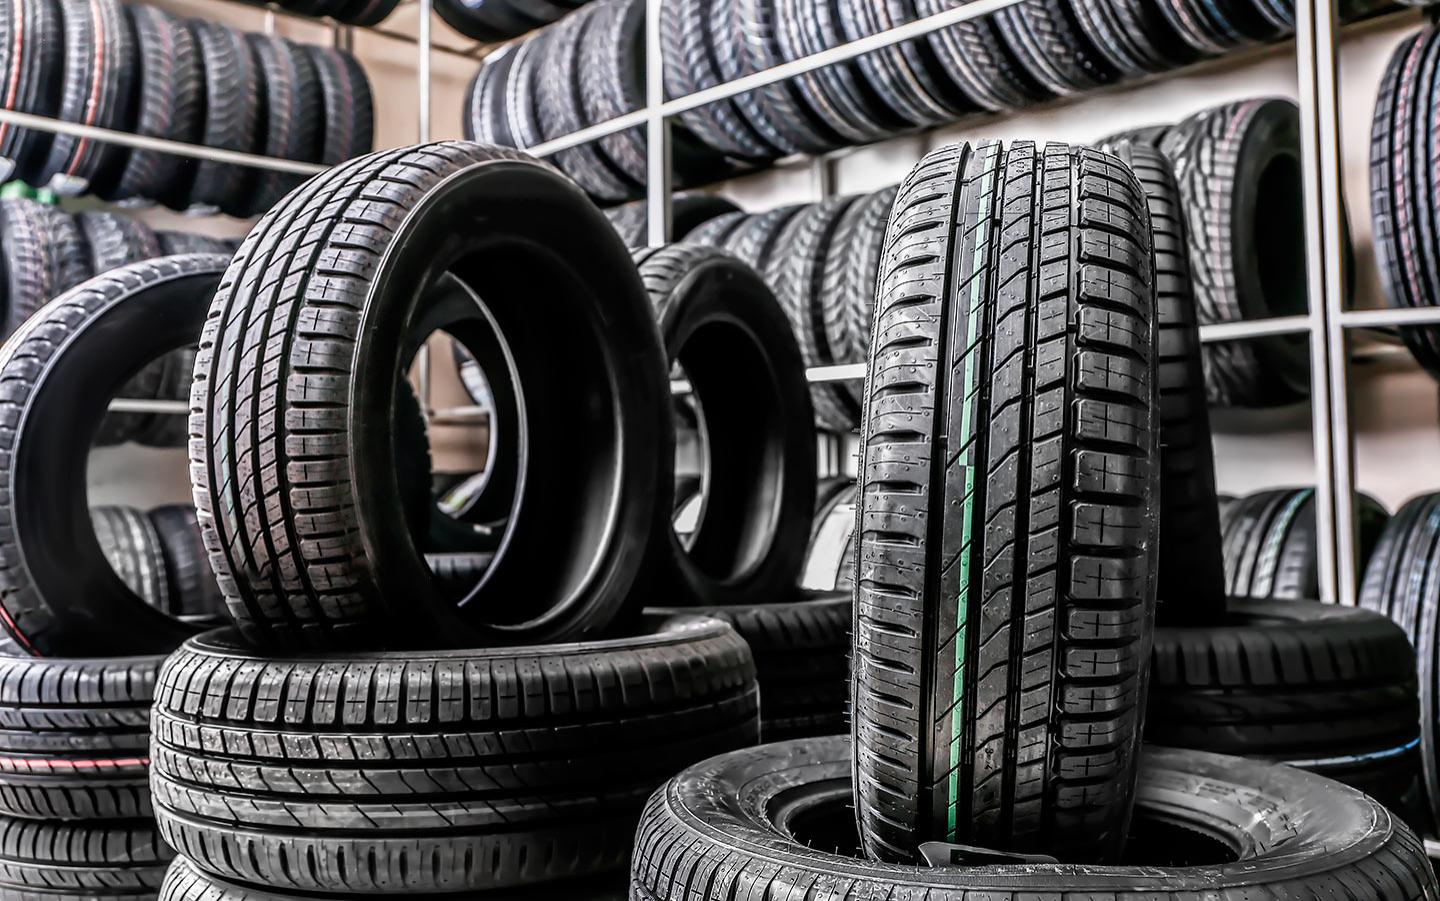 What is important to pay attention to when choosing tires?